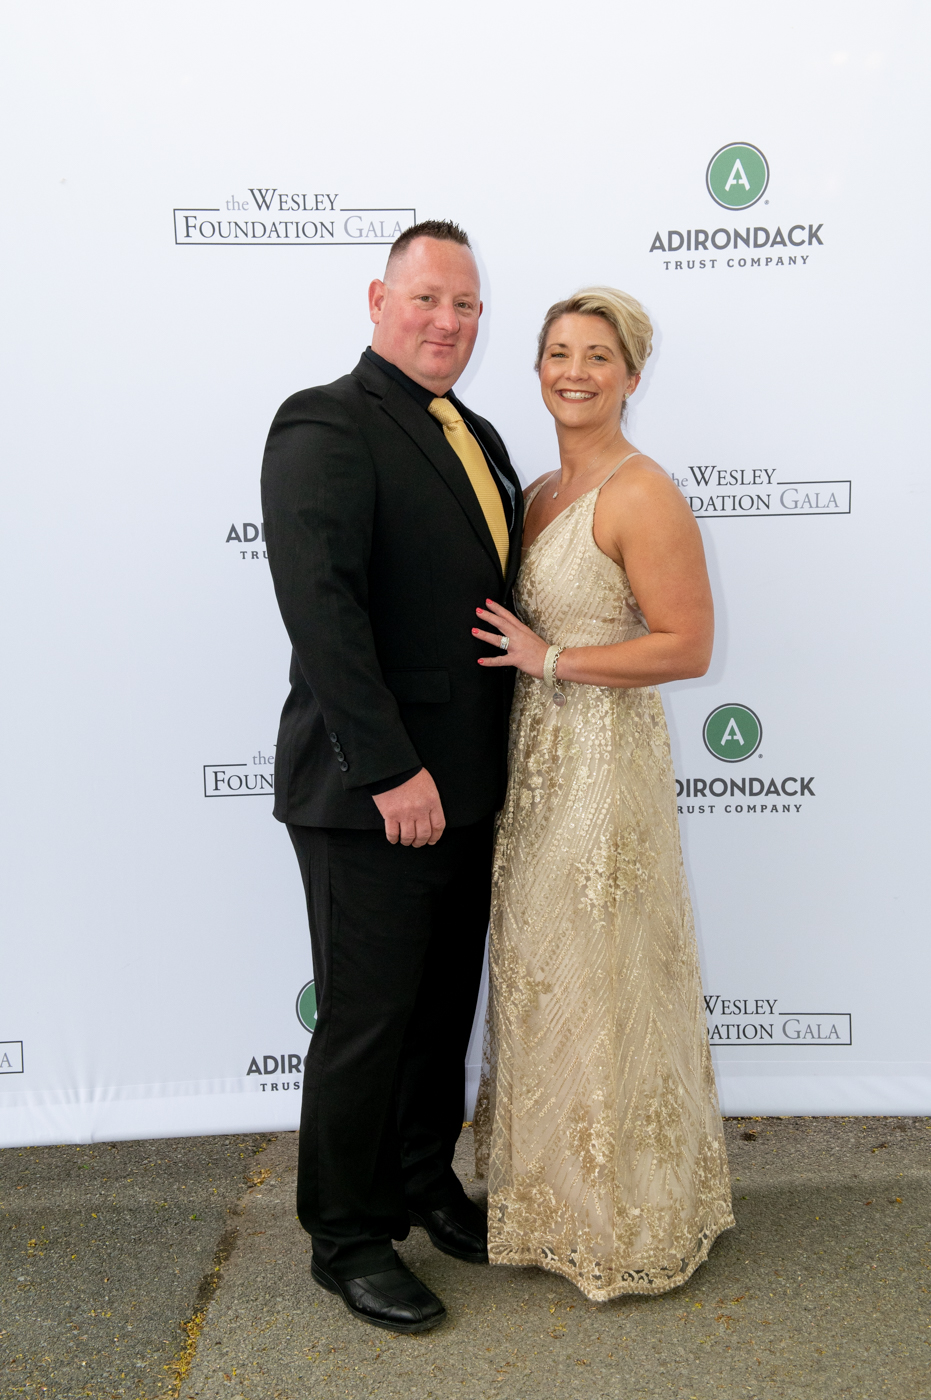 A couple posing for a picture, a man on the left wearing a black suit and a woman on the right wearing a golden dress